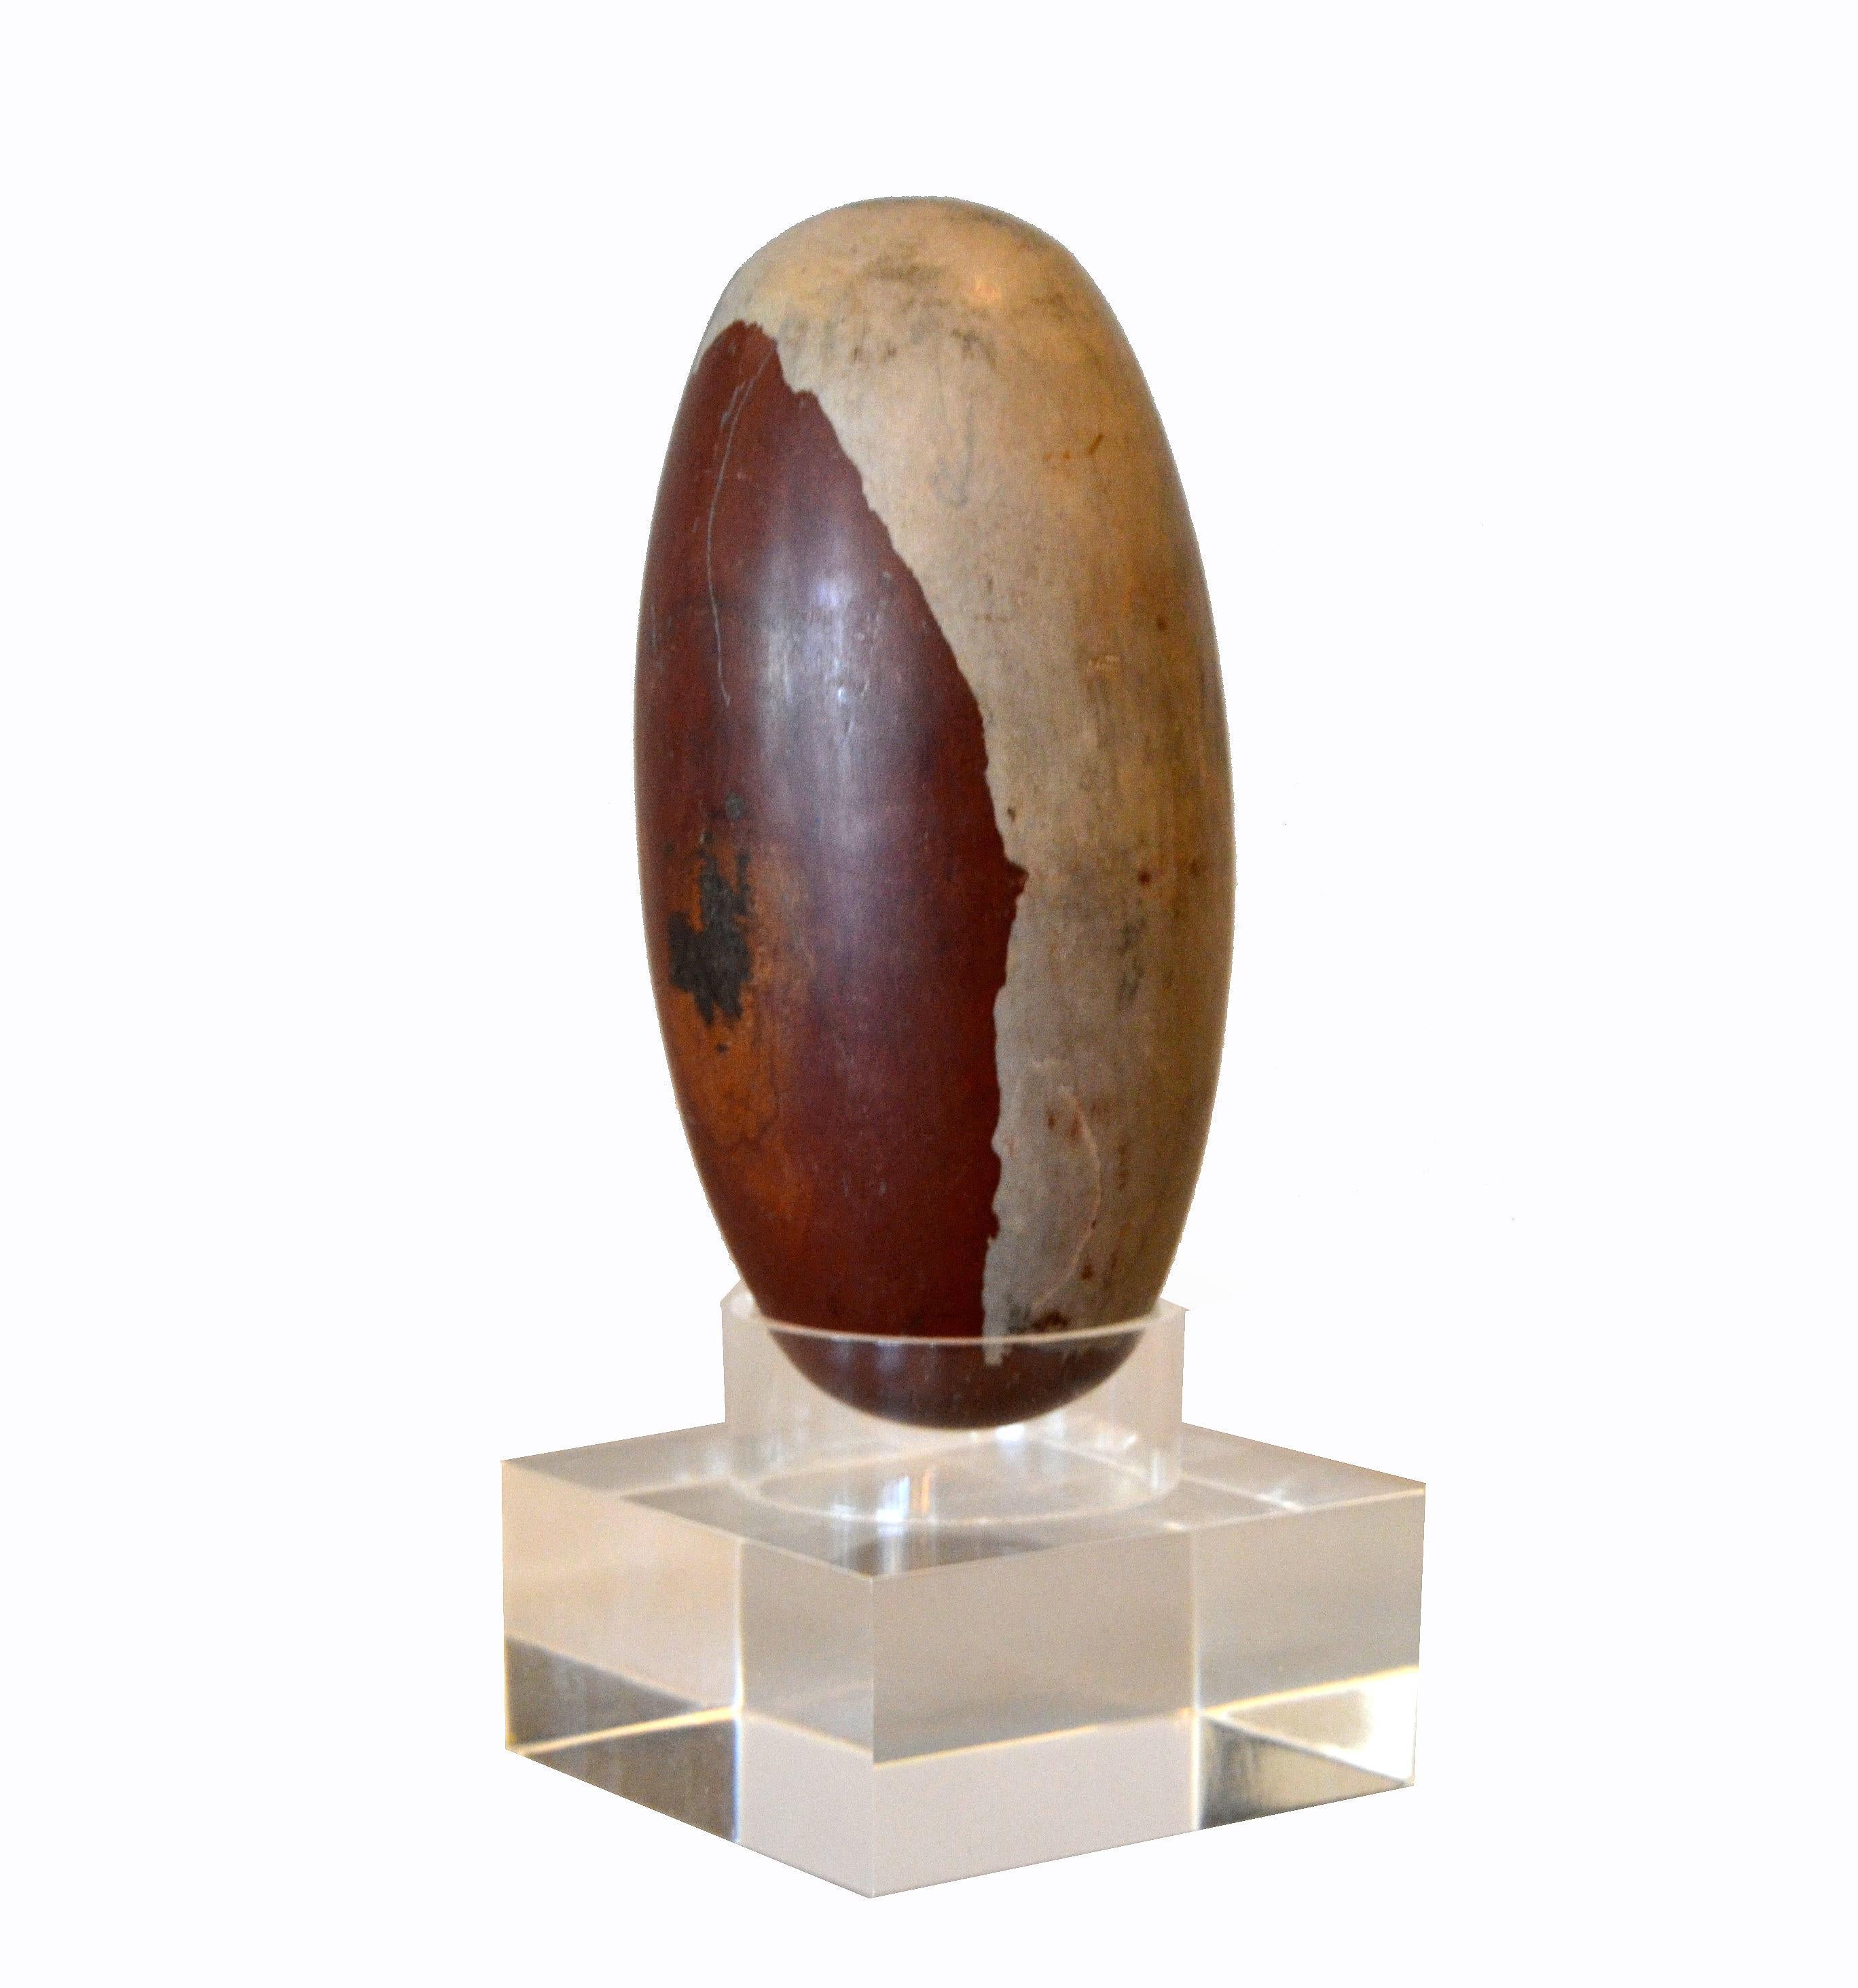 Antique Indian Tantric Shiva Lingam stone presented on a clear Lucite stand.
Please not the unique grain pattern of the stone.
Simply lovely and a great gift for this holiday season.